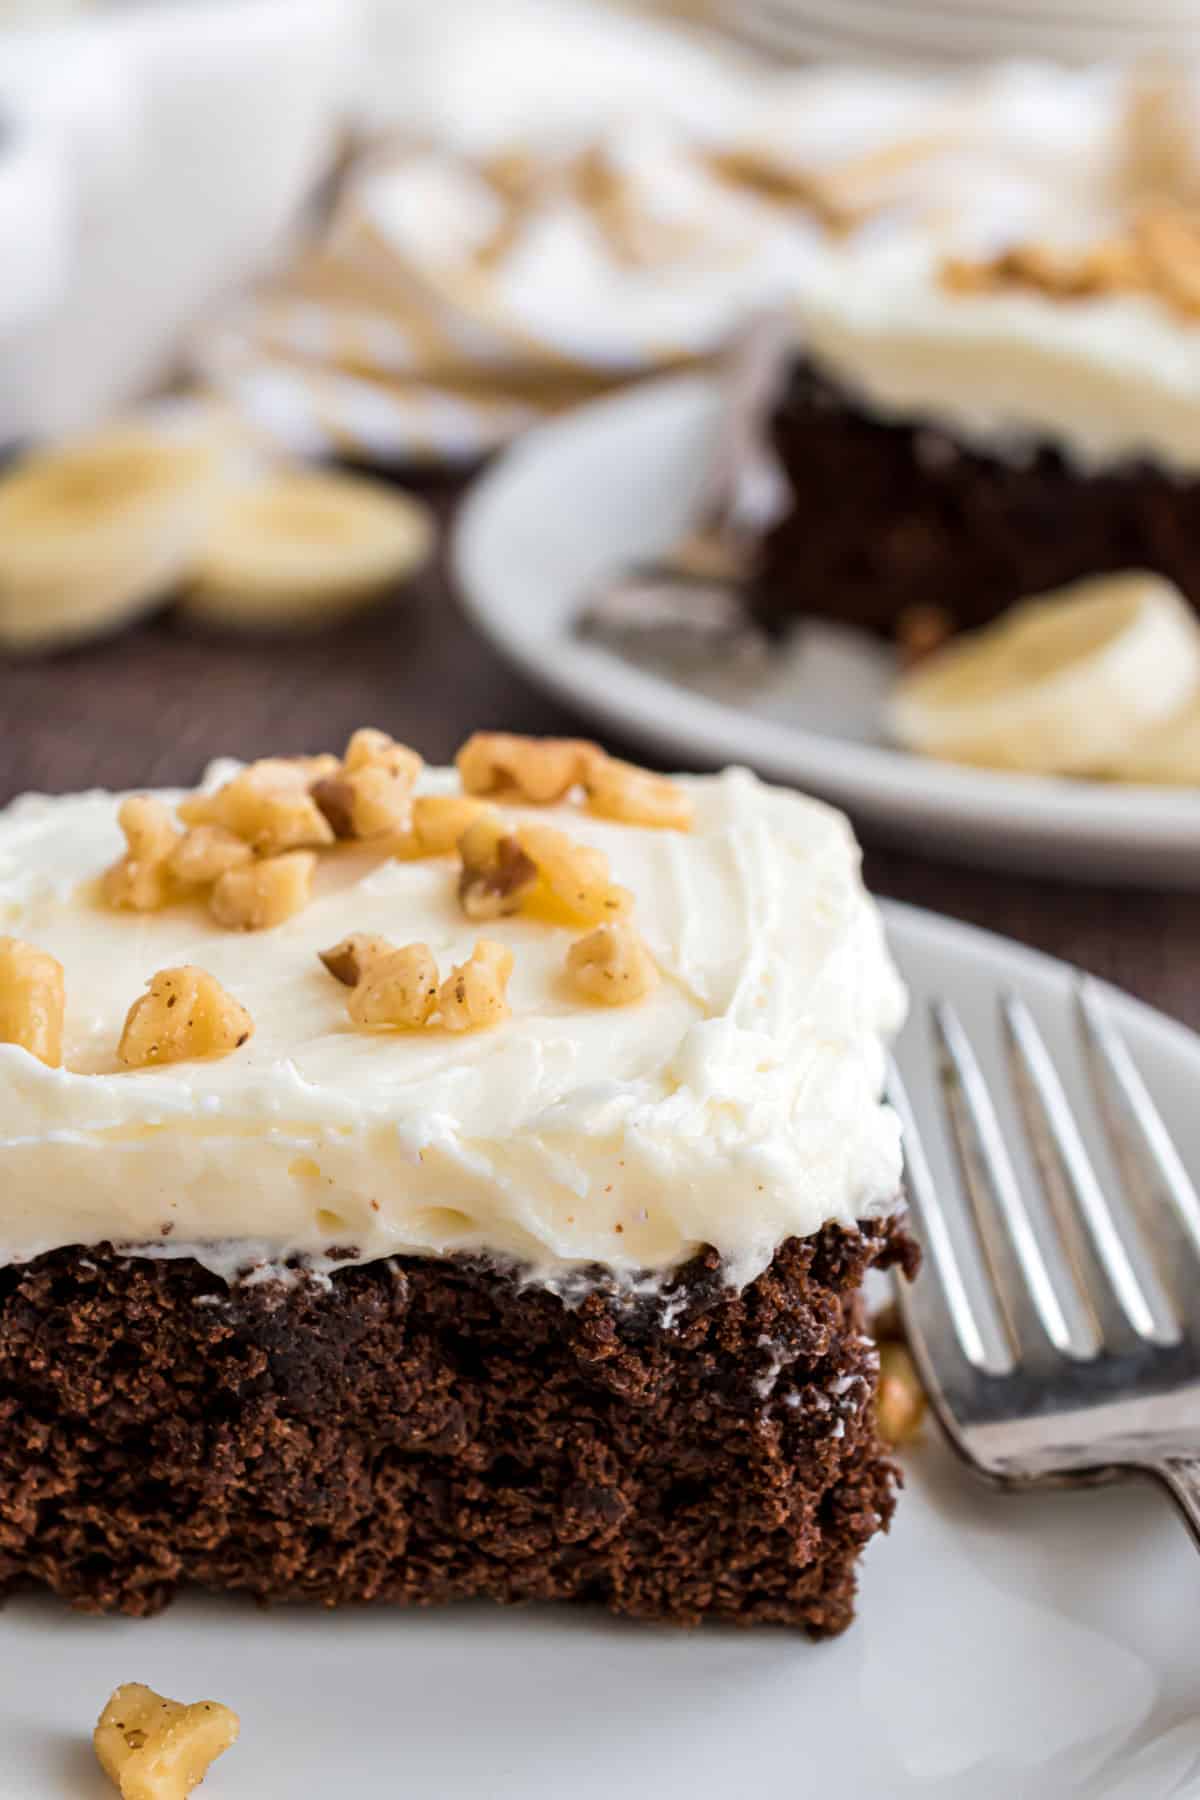 Slice of chocolate banana cake topped with cream cheese frosting and walnuts.